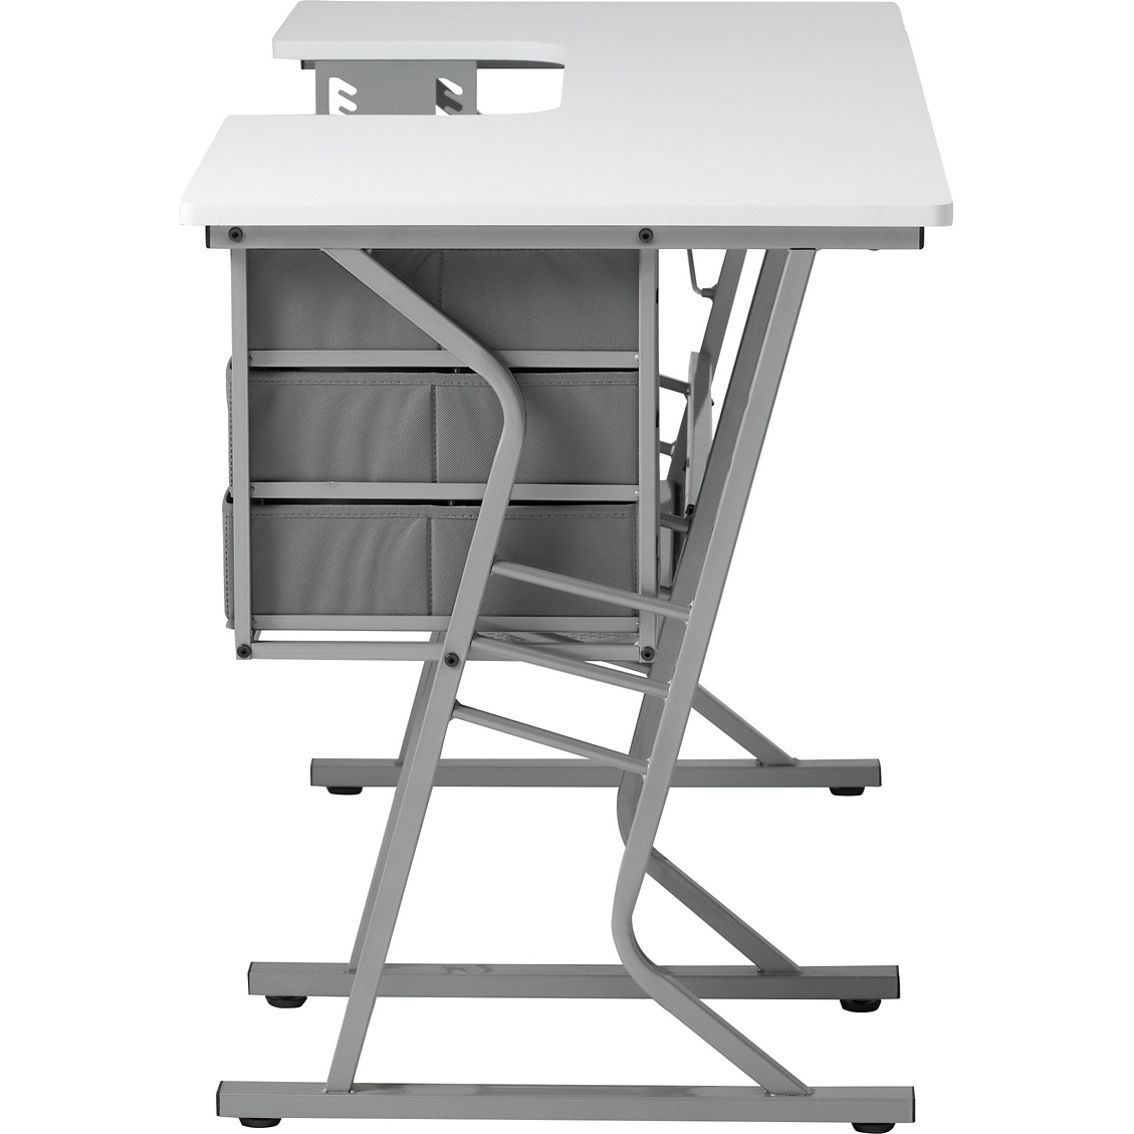 Studio Designs Sew Ready Eclipse Ultra Sewing Table - Image 2 of 8